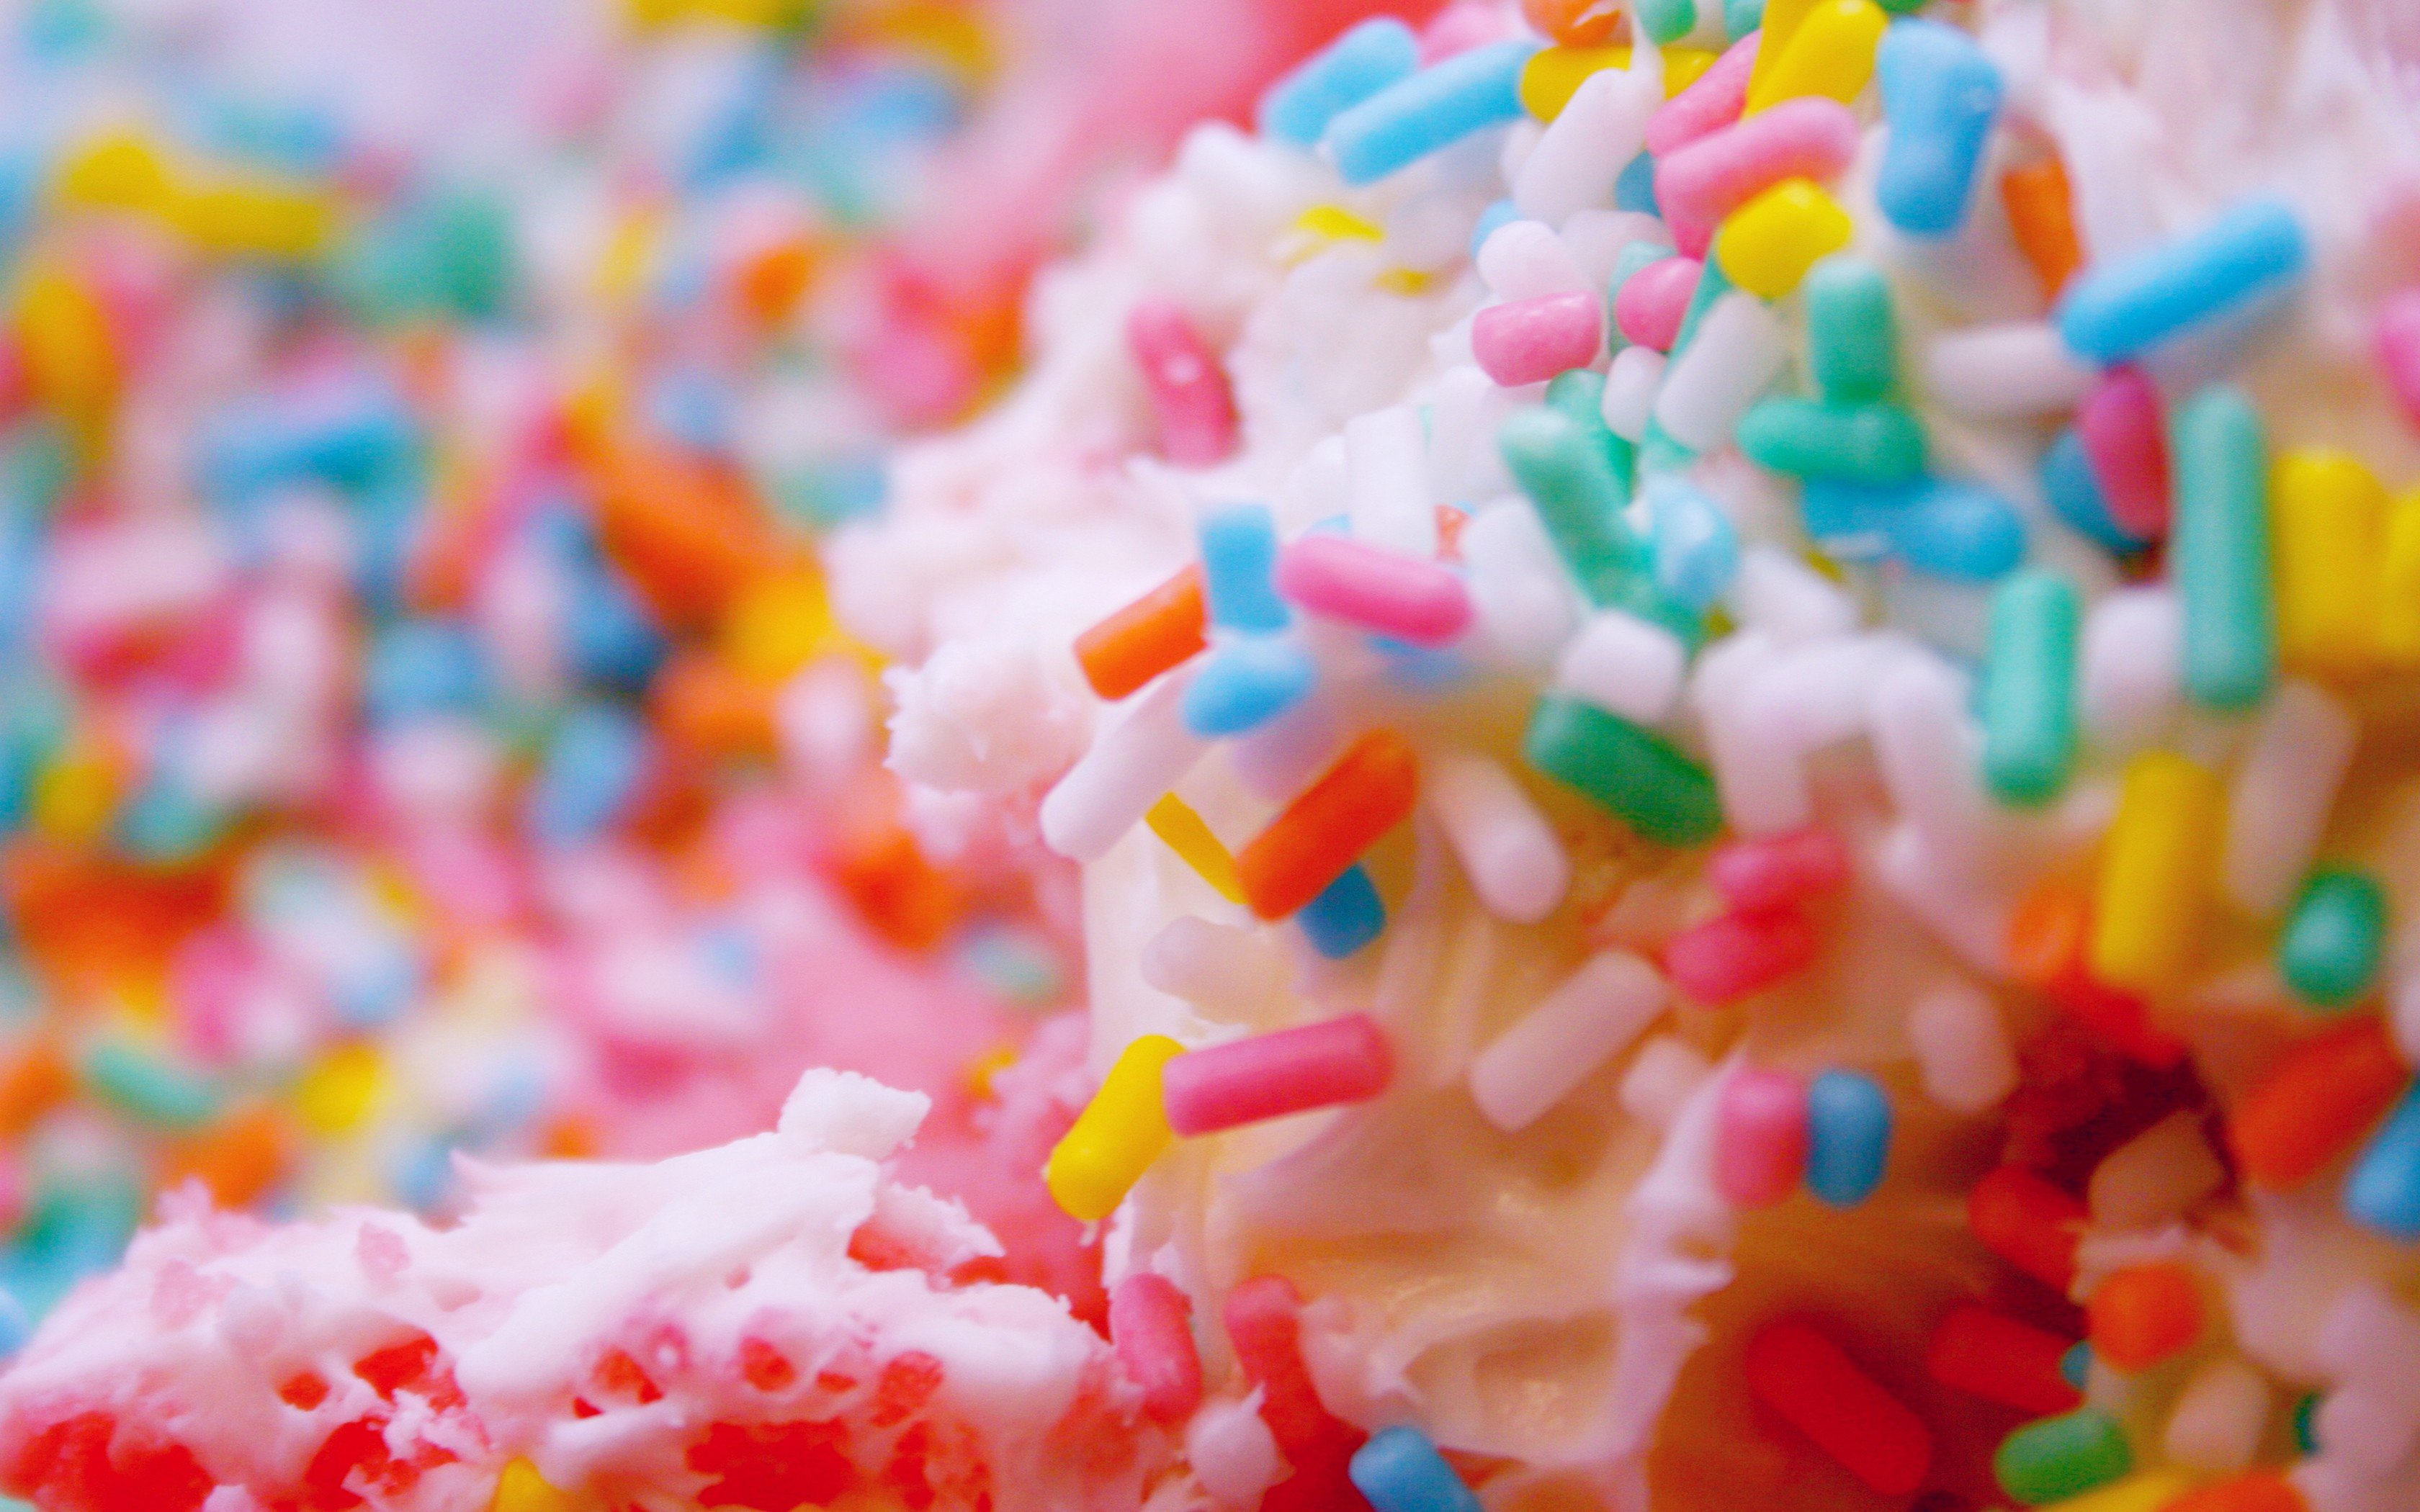 cakes, Happy birthday, Colorful, Sweets, Food Wallpaper